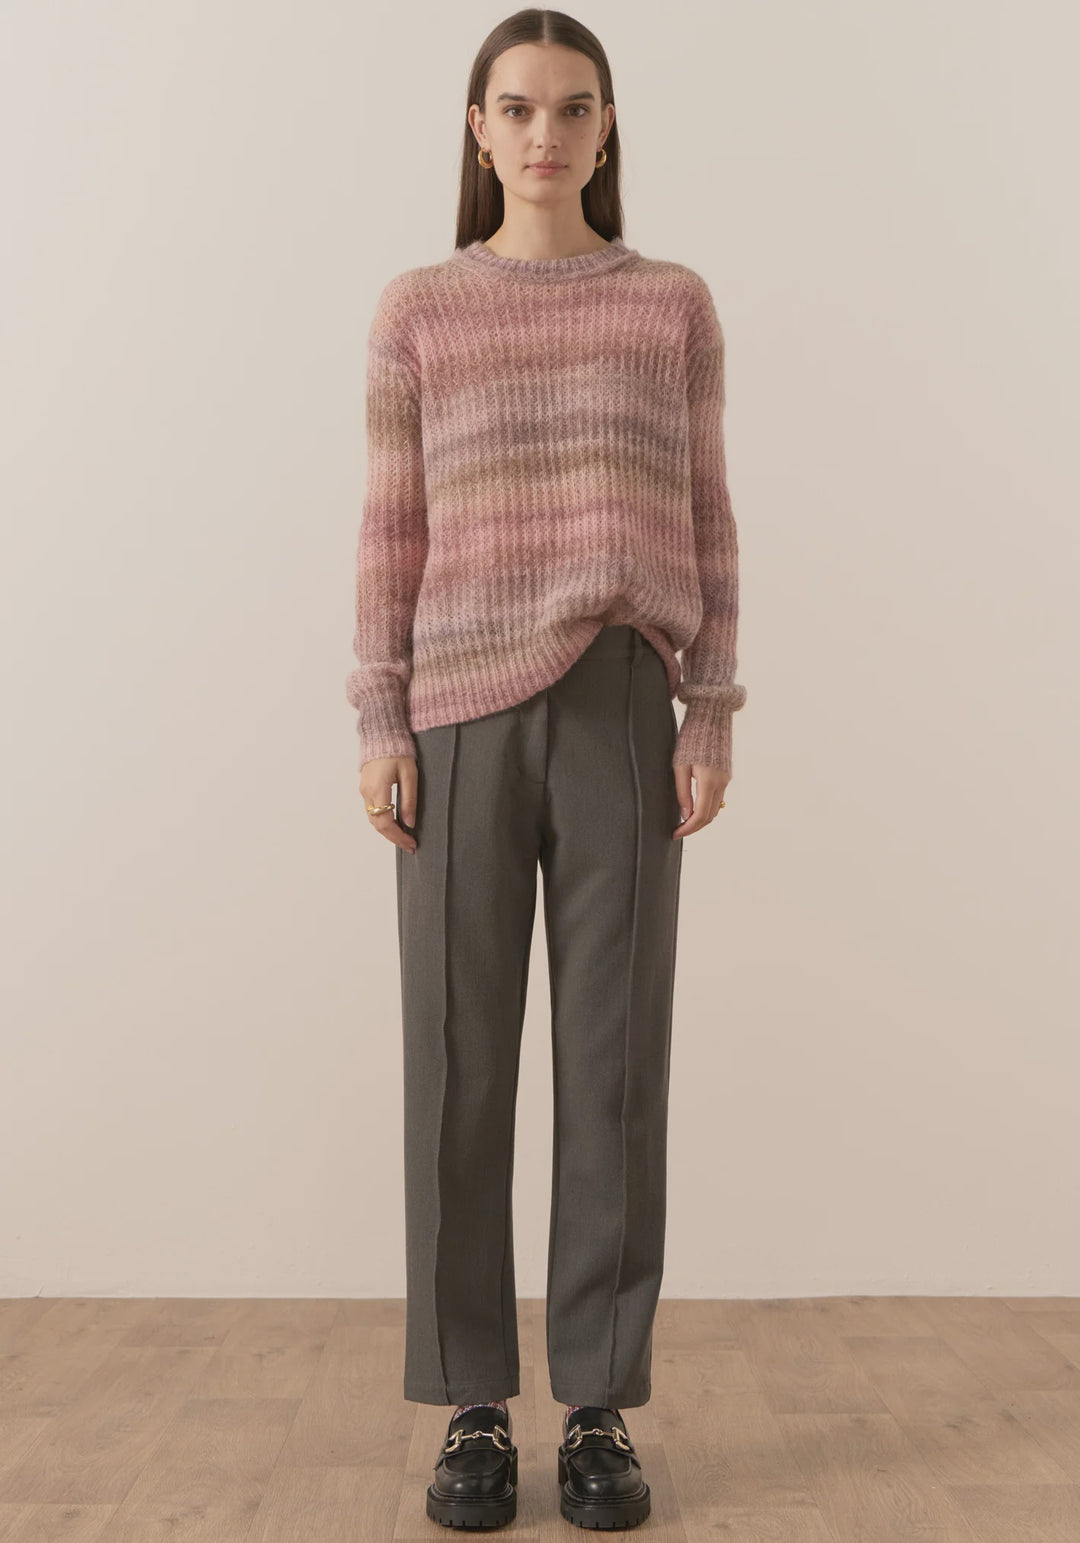 Russo Space Dyed Knit - Rose knits POL   